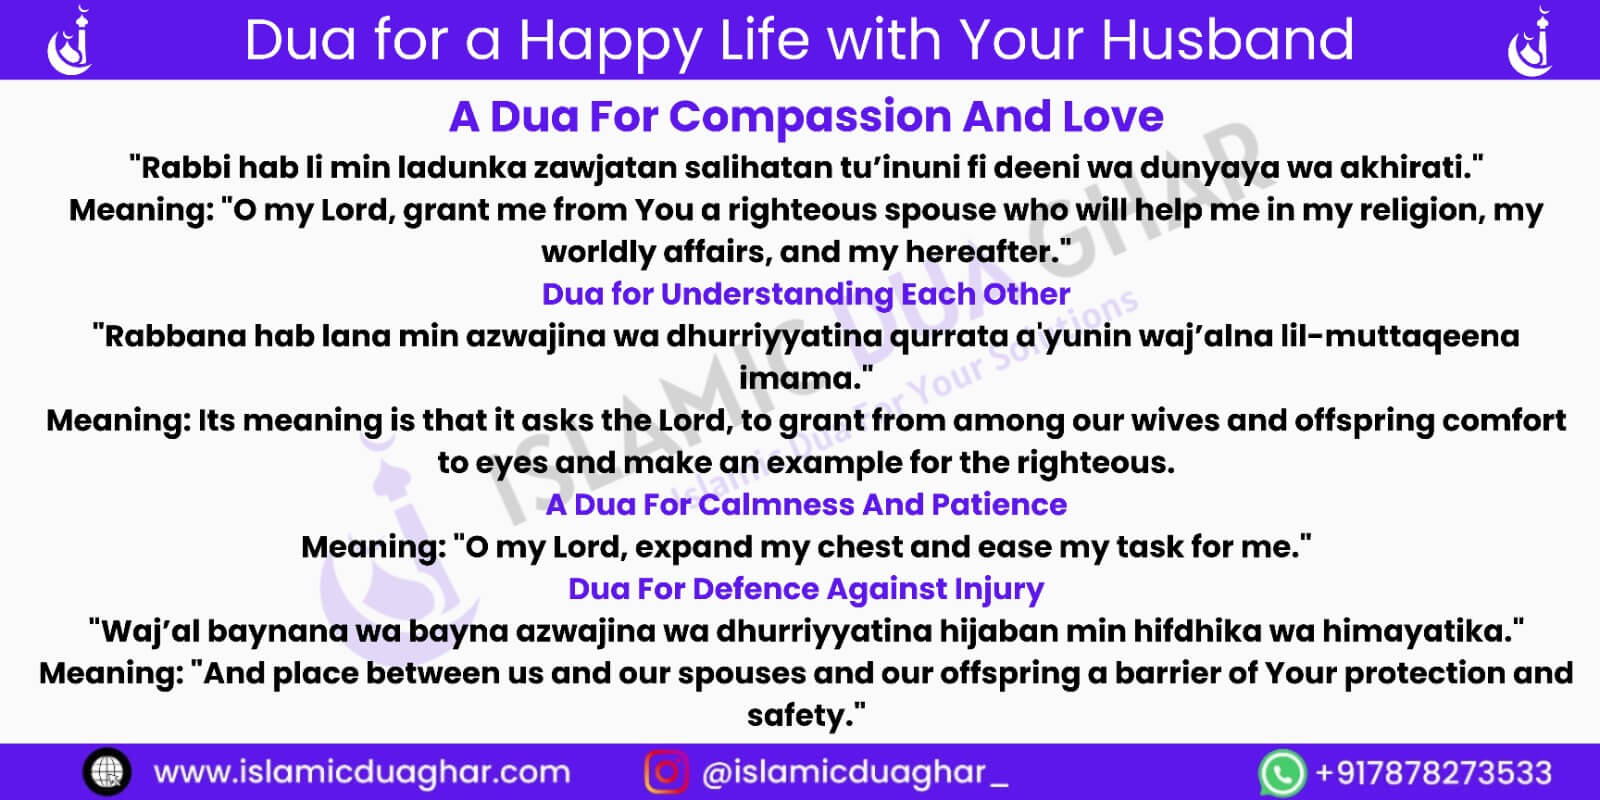 dua for a happy life with husband